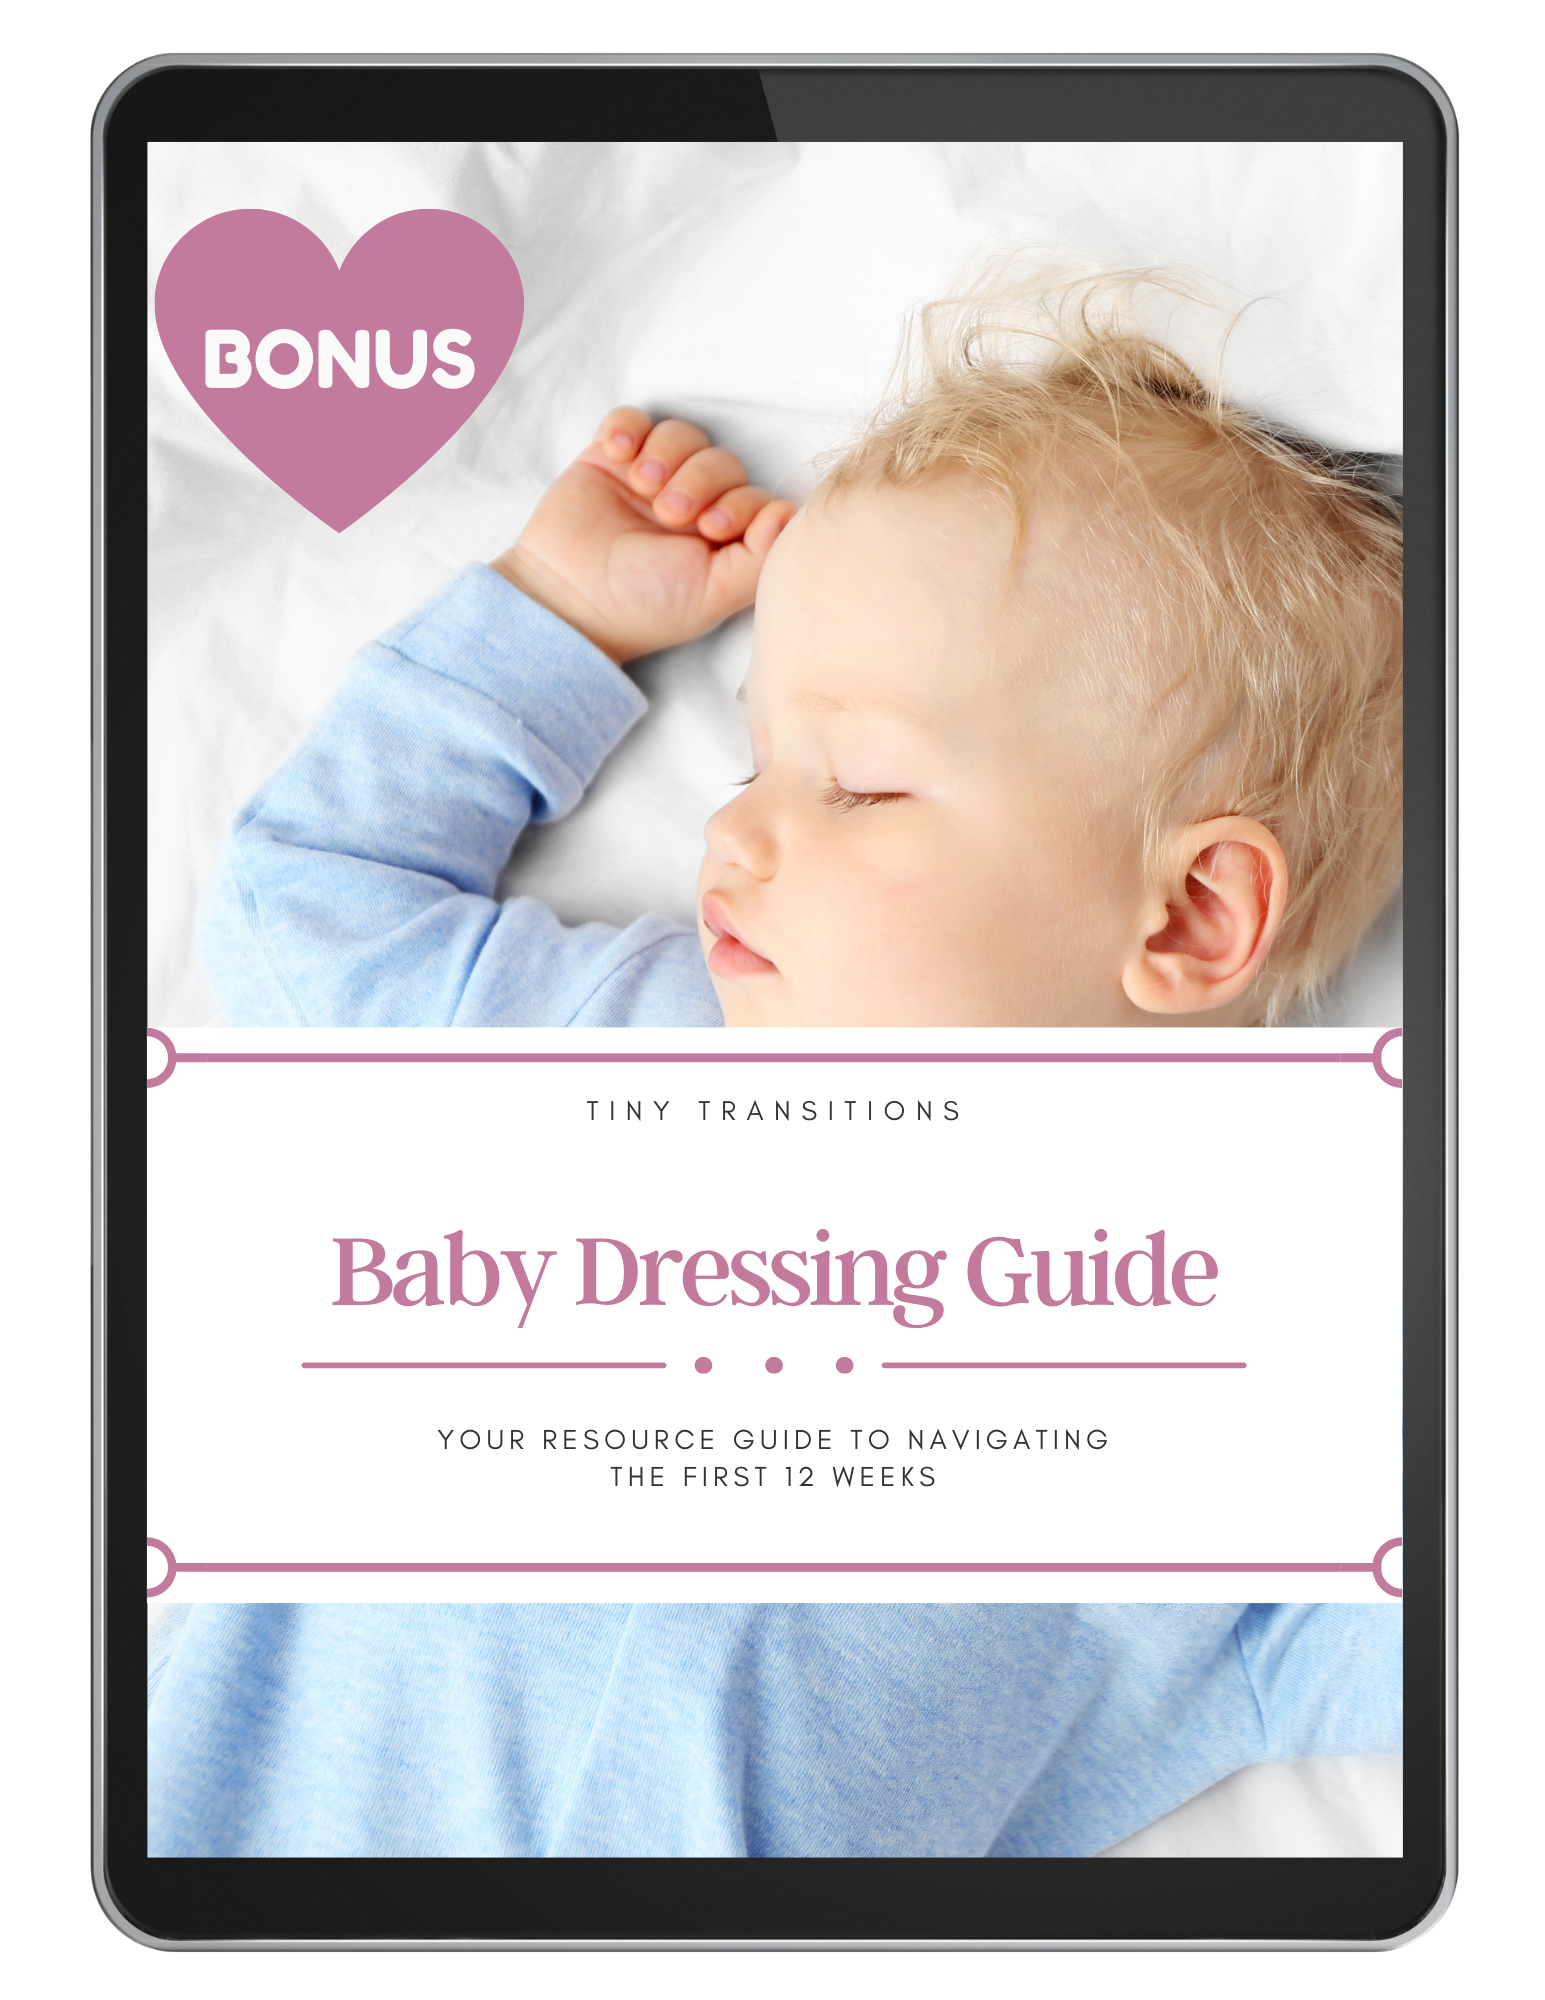 Baby Dressing Guide